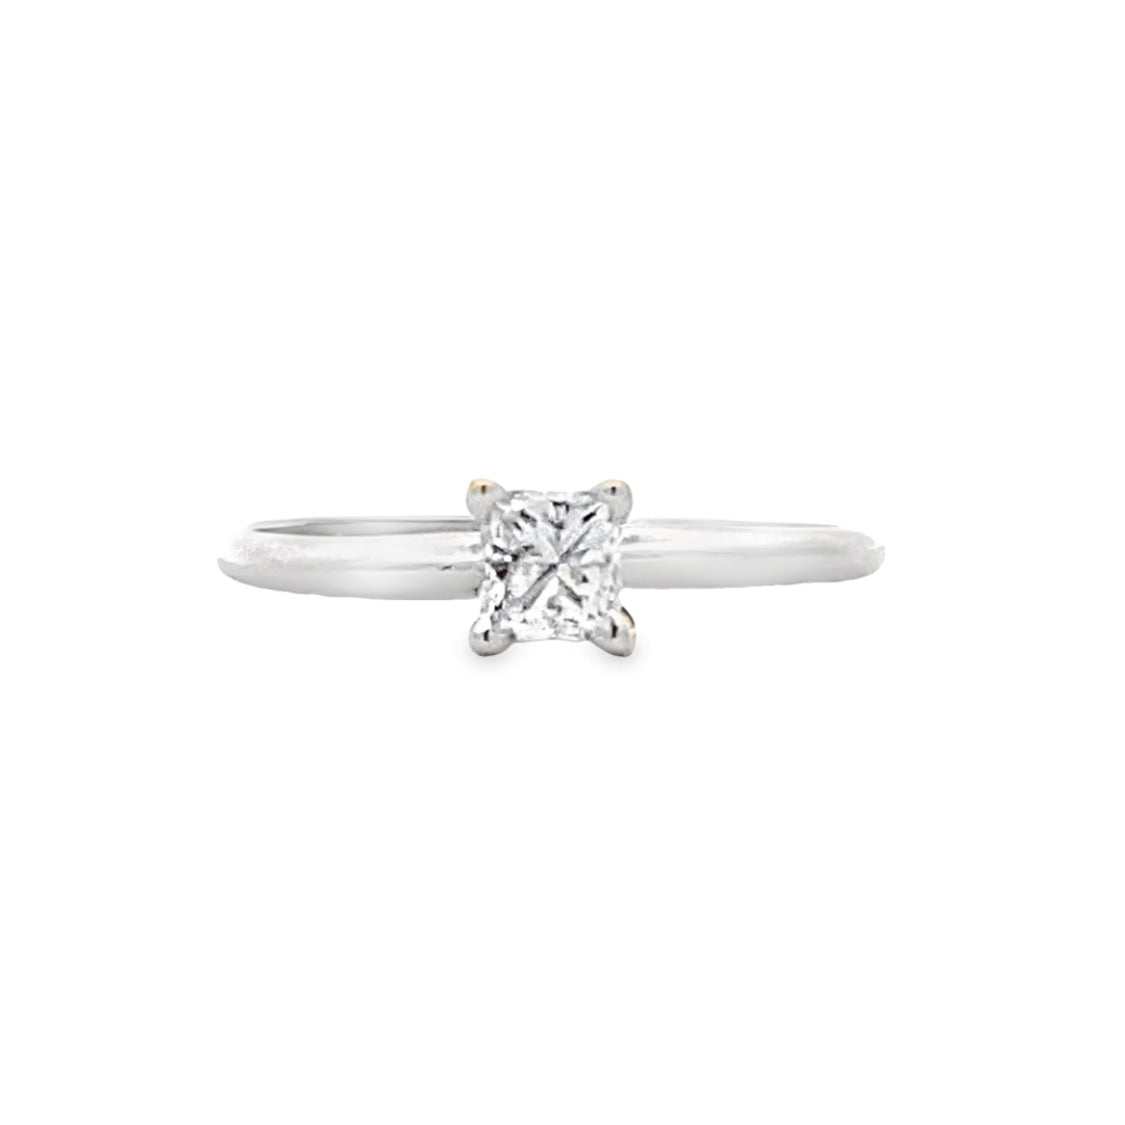 Beeghly & Co. 14 Karat Solitaire Princess Cut Diamond Engagement Ring